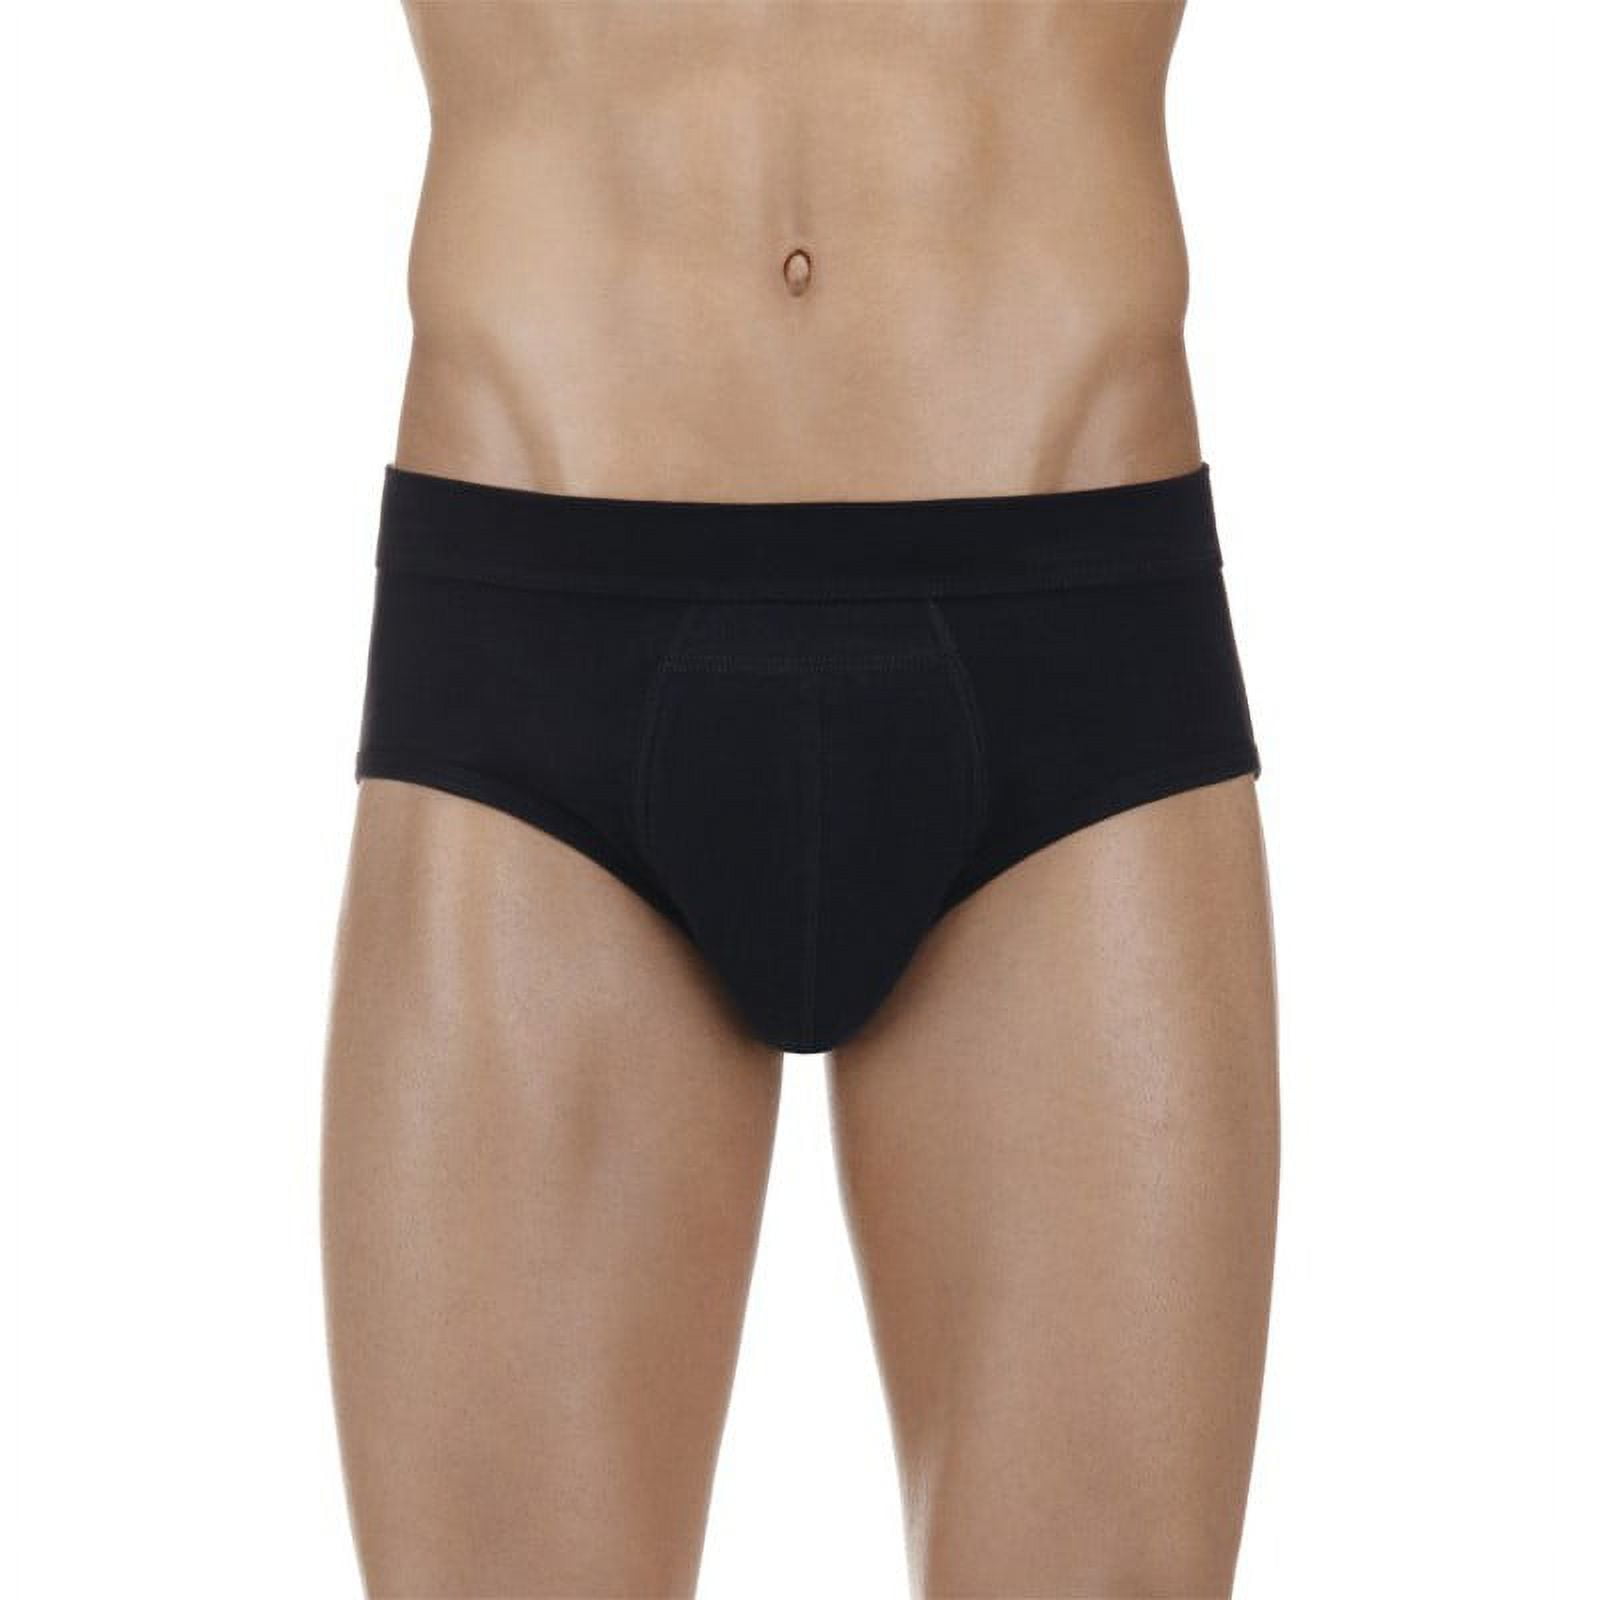 PROTECHDRY - Washable & Reusable Urinary Incontinence Cotton Brief